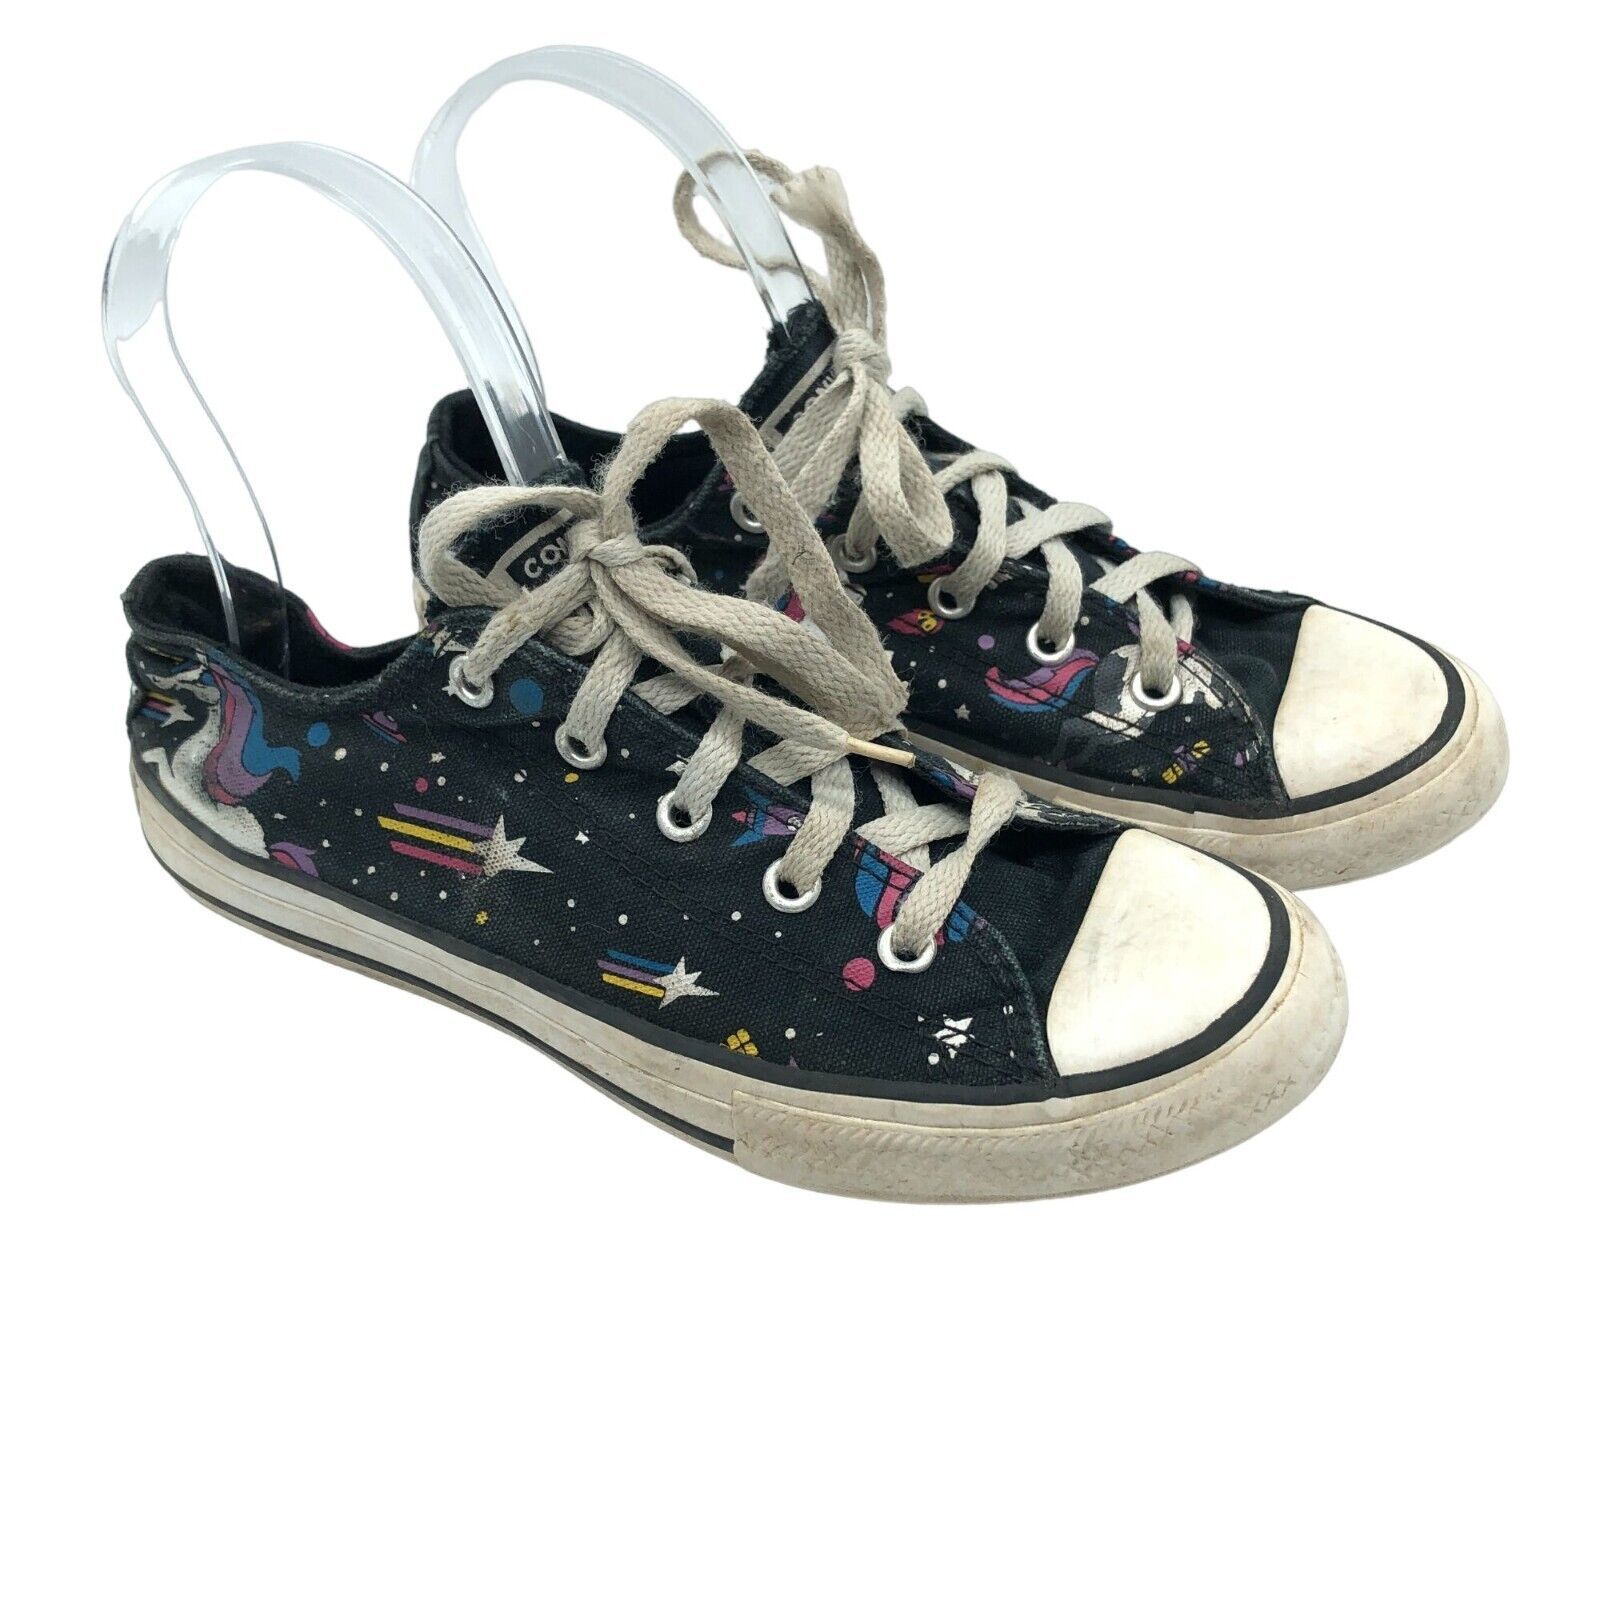 Primary image for Converse Kids Girls Unicorns Low Top Sneakers Black Canvas Size 3